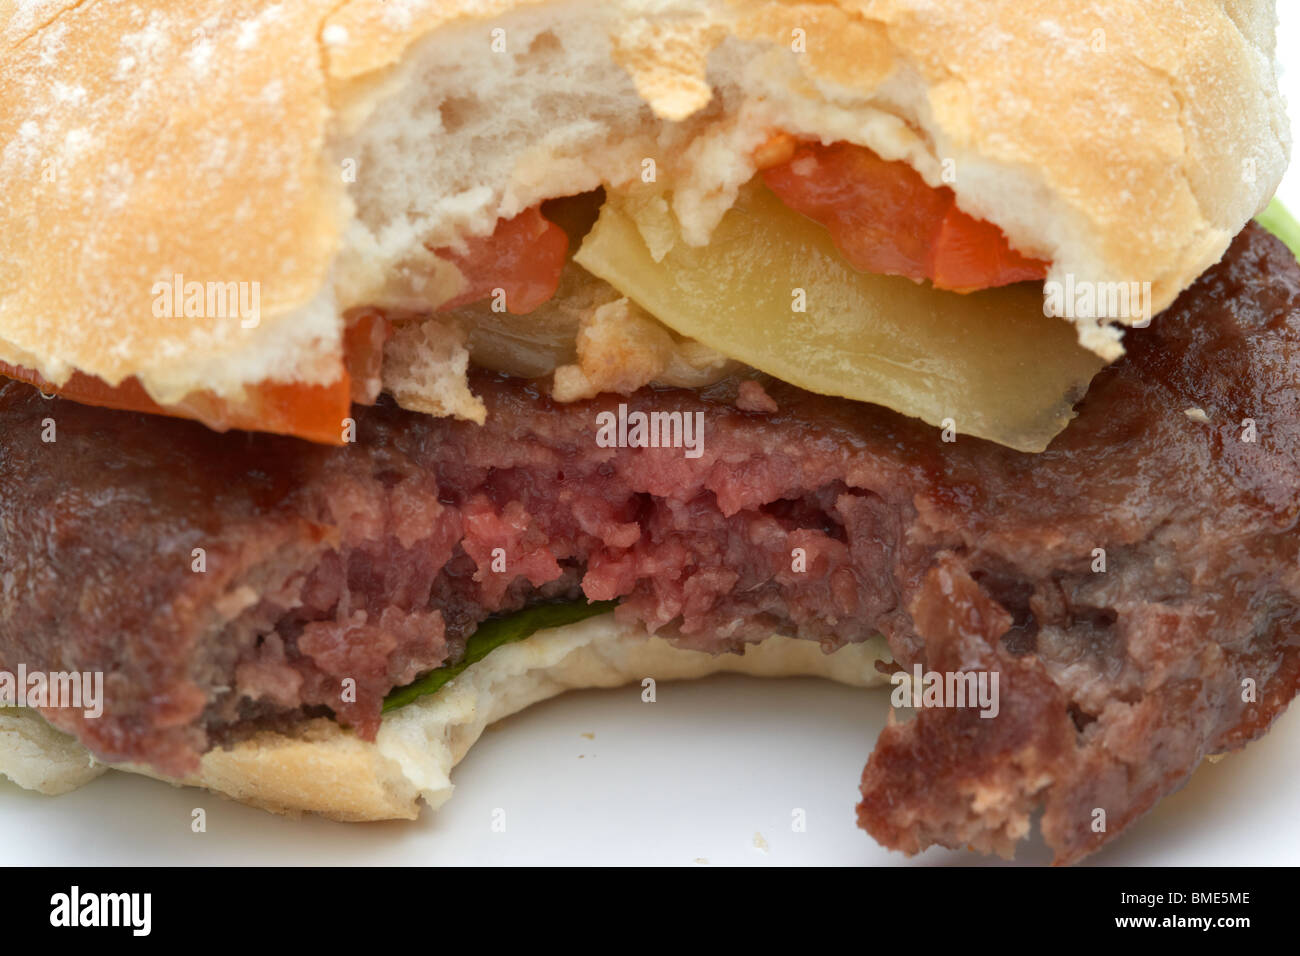 Bite Taken Out Of Partially Cooked Home Made Hamburger Showing Raw Meat Stock Photo Alamy